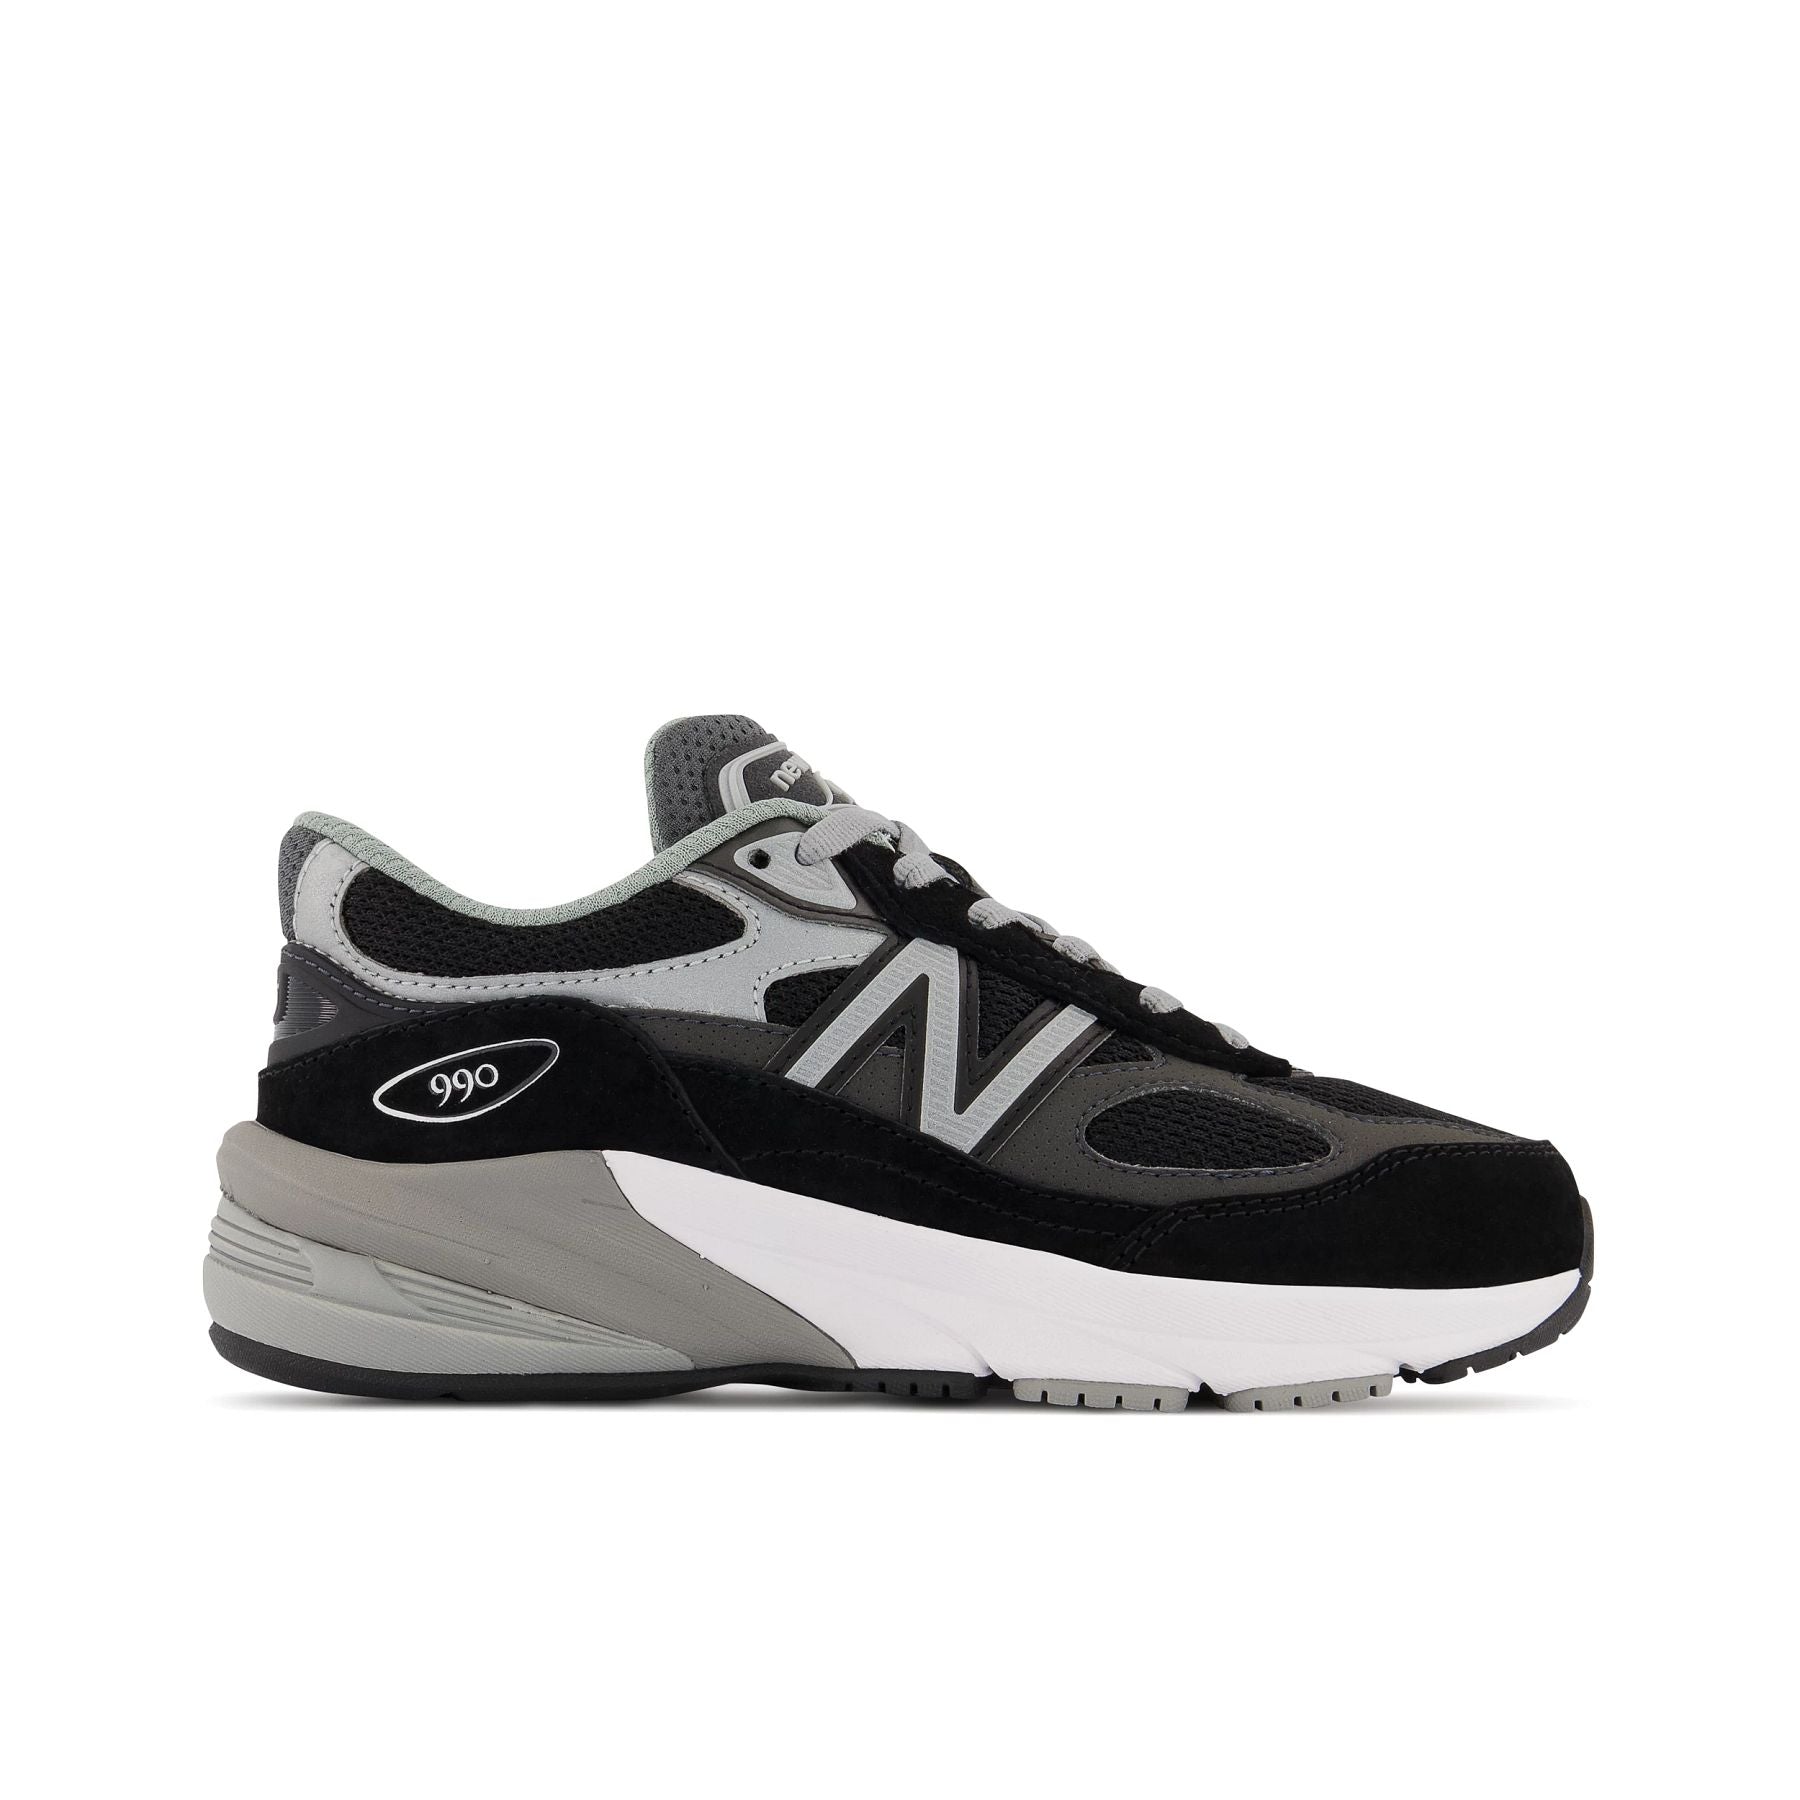 Lateral view of the Kids New Balance 990 V6 in the color Black/Silver